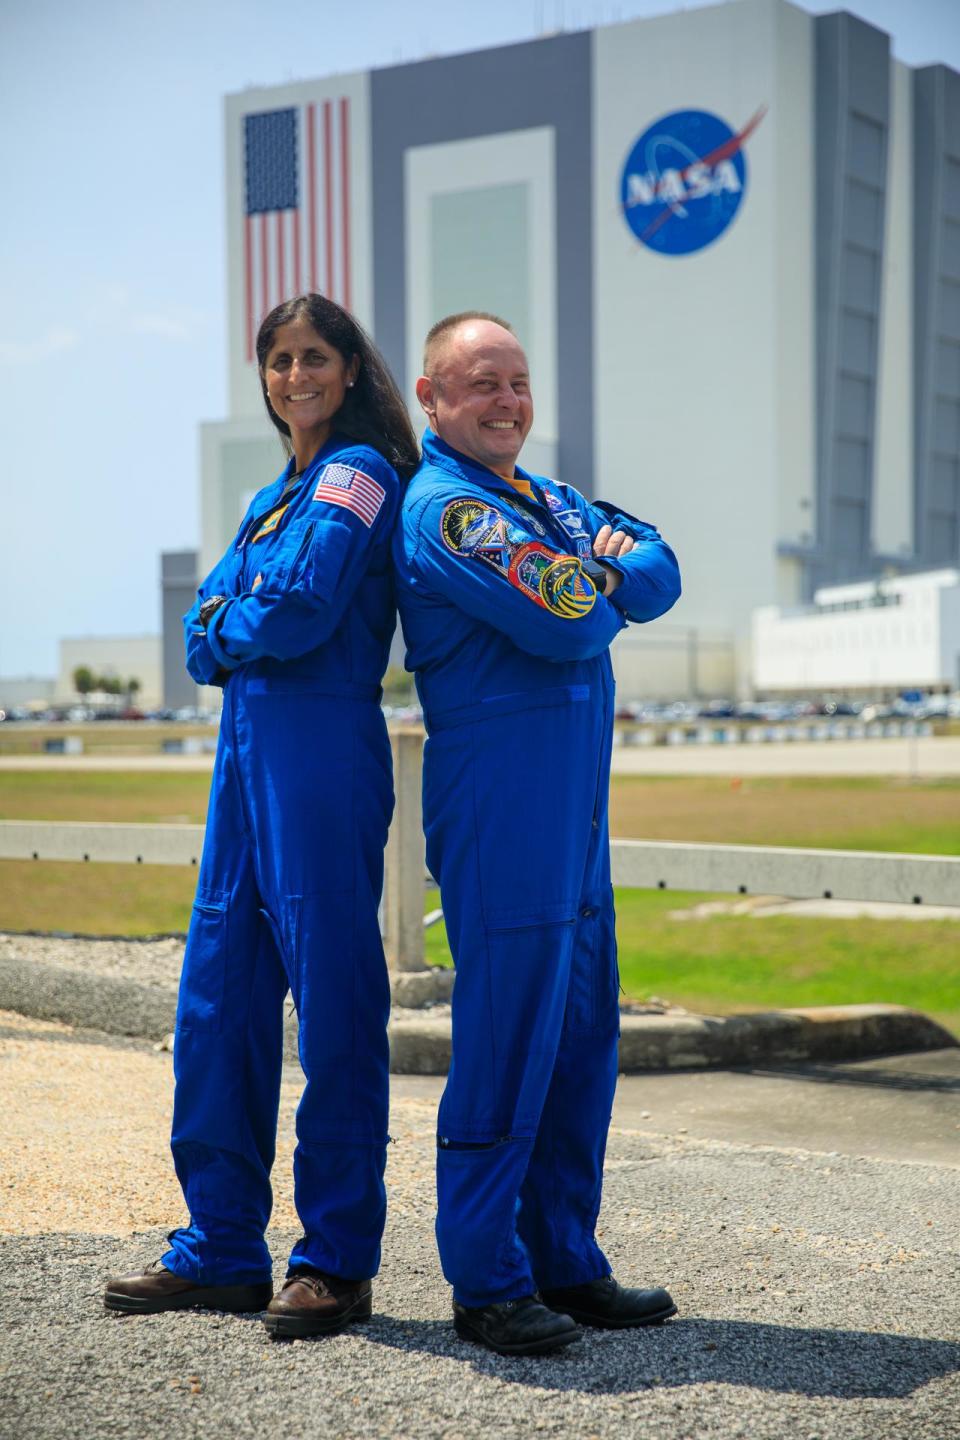 NASA astronauts Suni Williams, left, and Mike Fincke, right, pose for photographs while visiting NASA’s Kennedy Space Center in Florida, May 18, 2022, in advance of the agency’s Boeing Orbital Flight Test-2 (OFT-2) for NASA’s Commercial Crew Program.